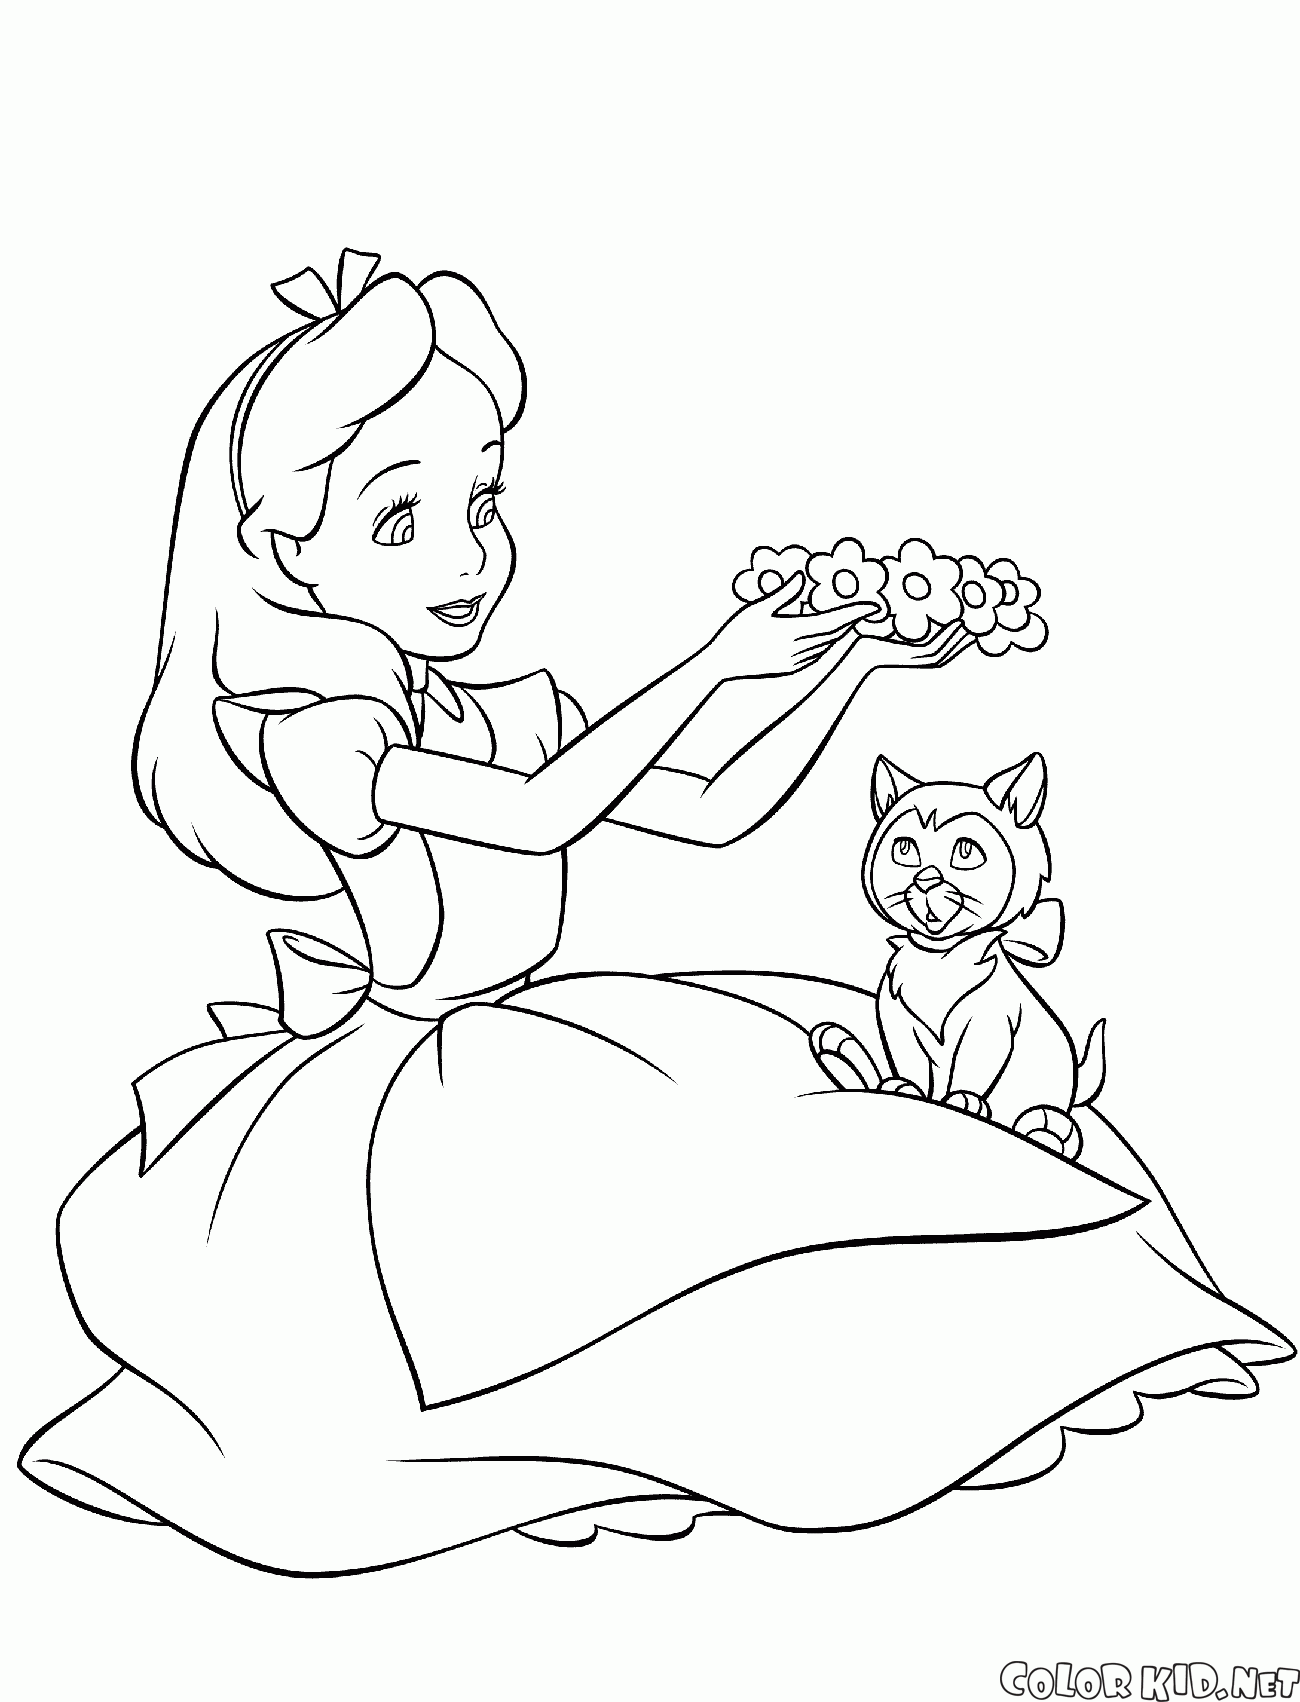 Coloring page - Cheshire Cat on the hunt